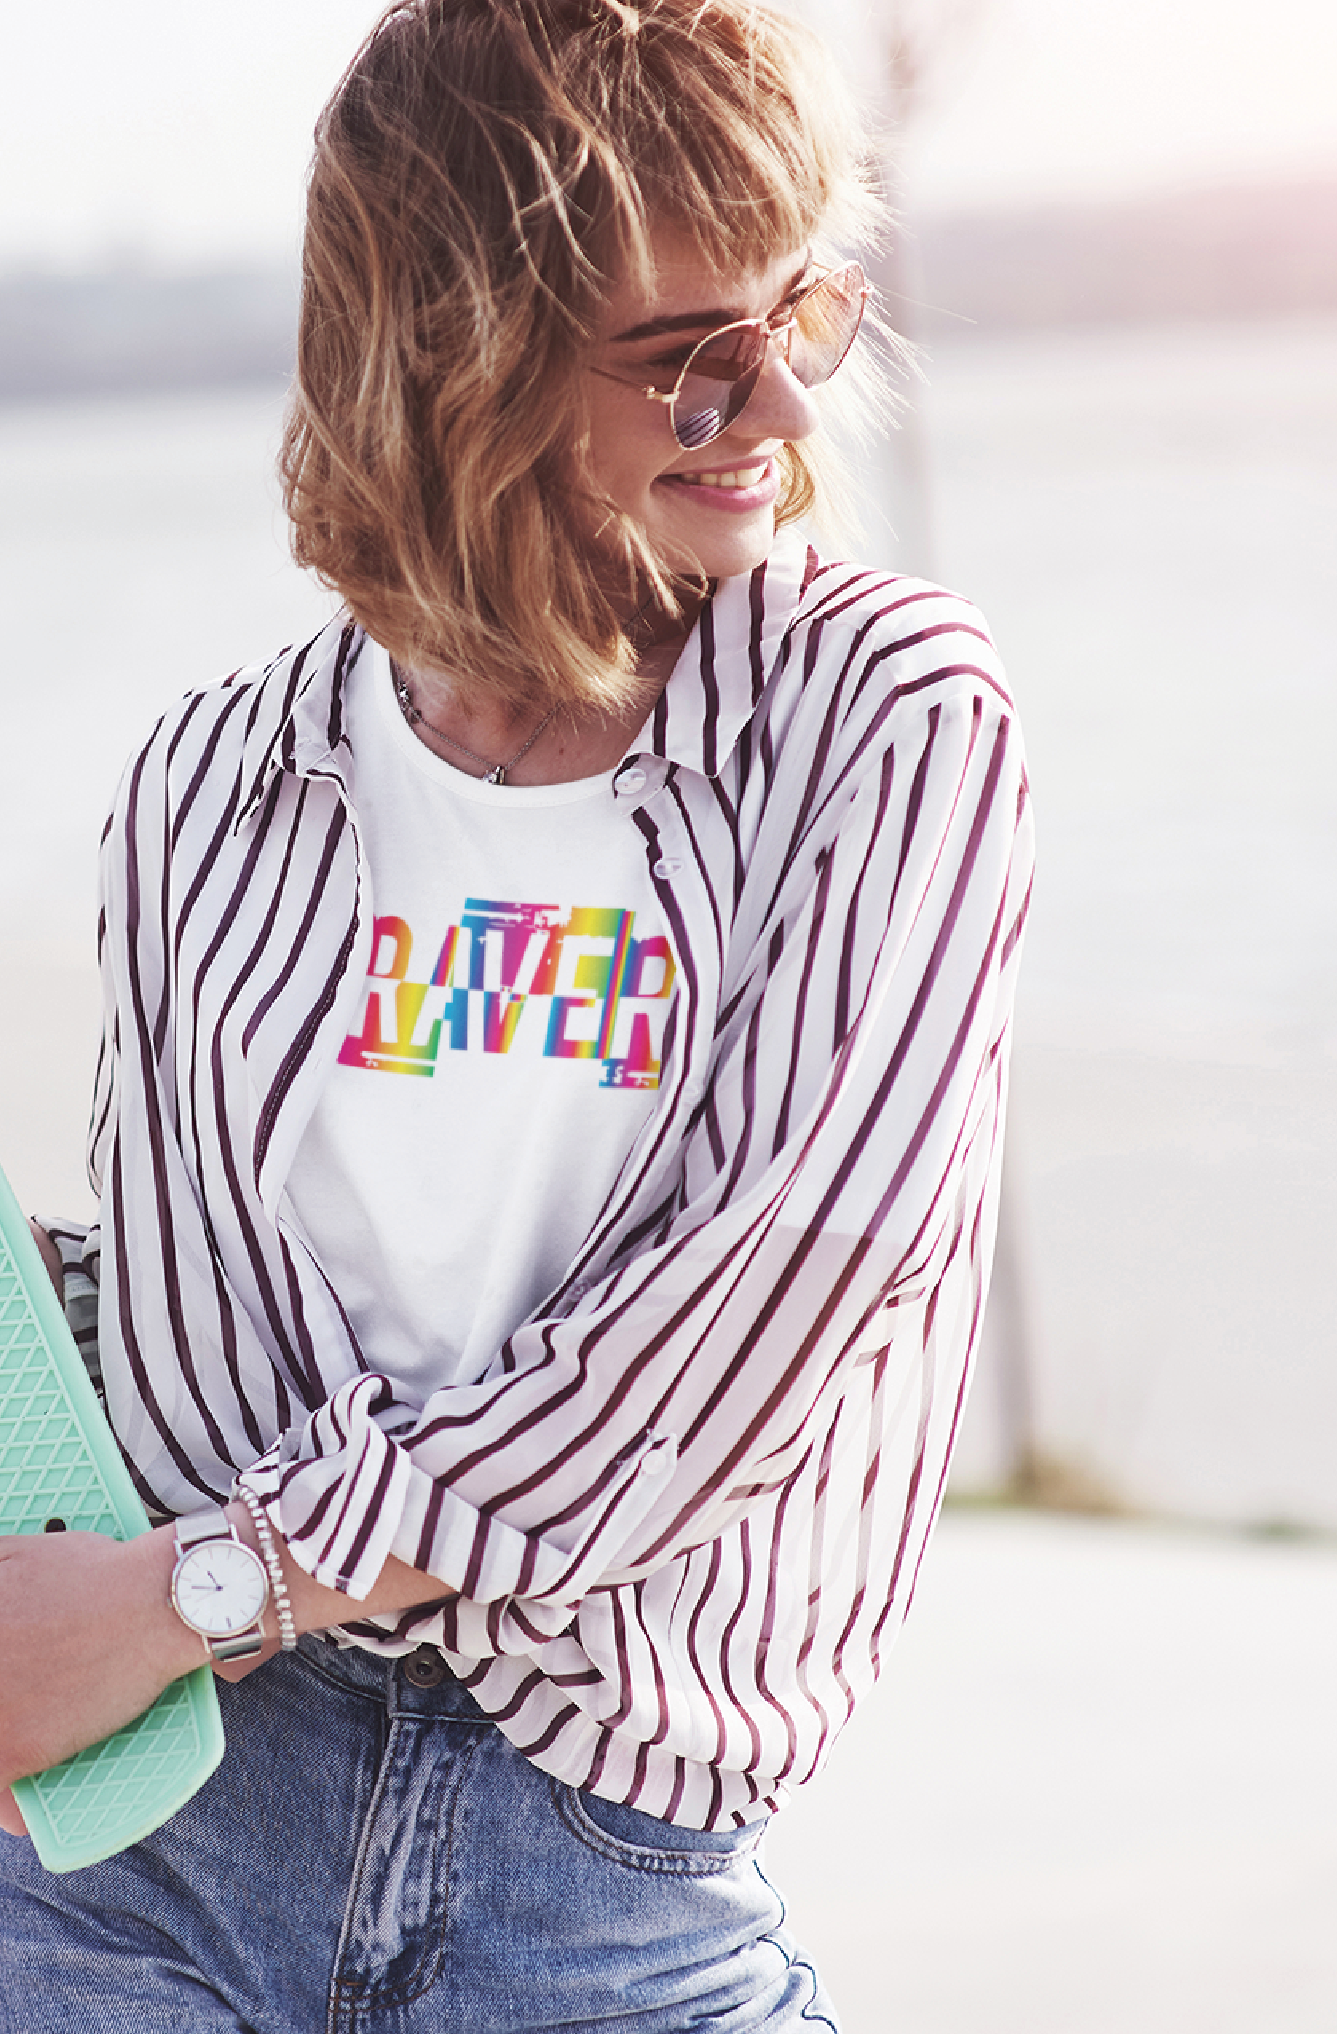 Women with skate board wearing a white braver print in rainbow styled with smart casual shirt and other accessories